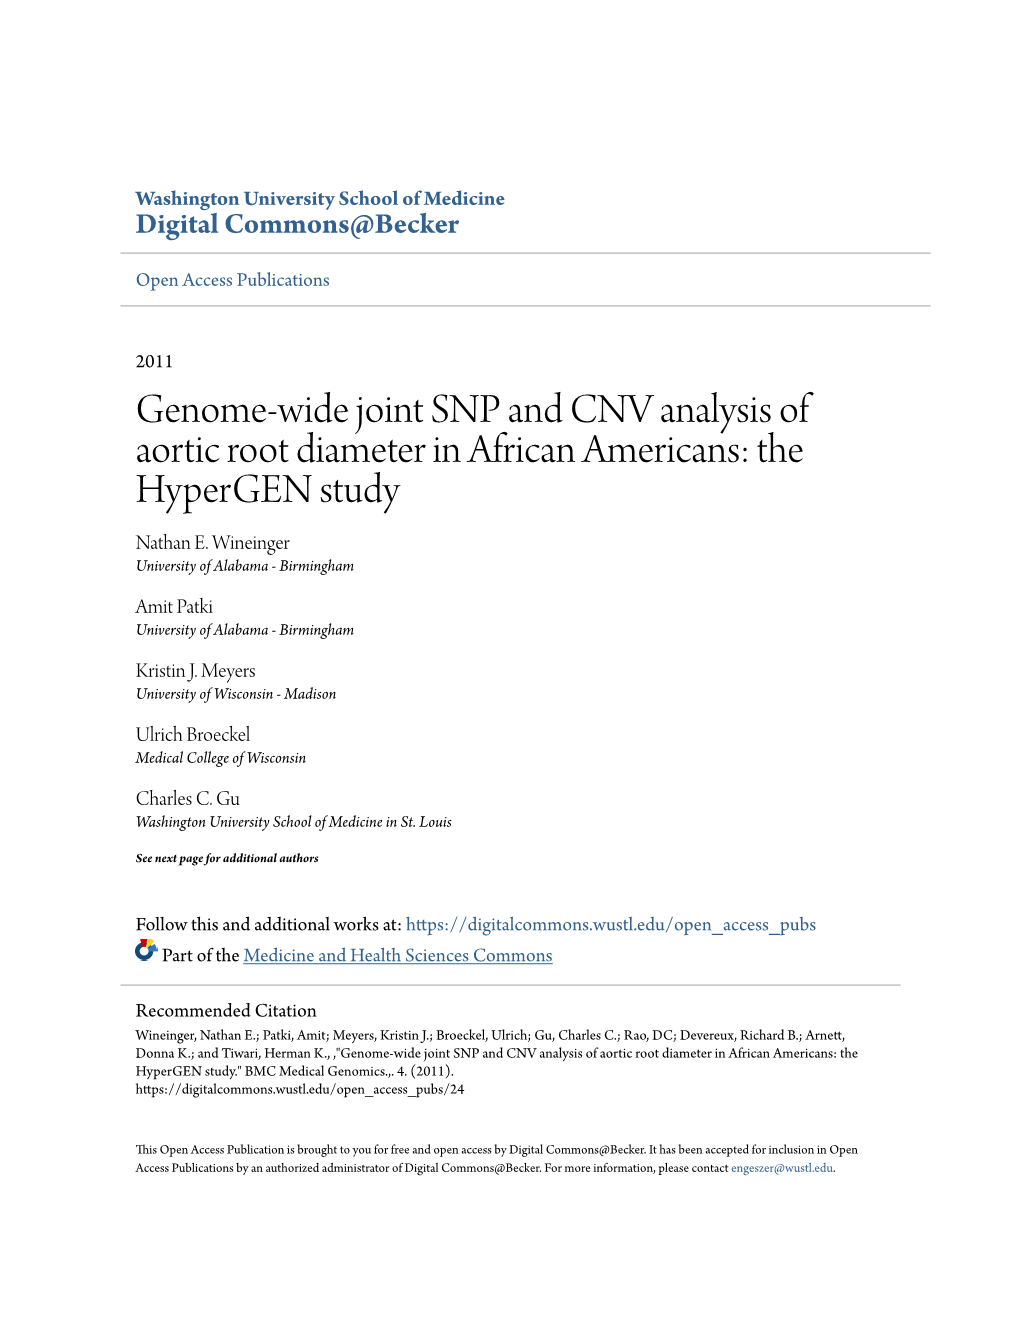 Genome-Wide Joint SNP and CNV Analysis of Aortic Root Diameter in African Americans: the Hypergen Study Nathan E